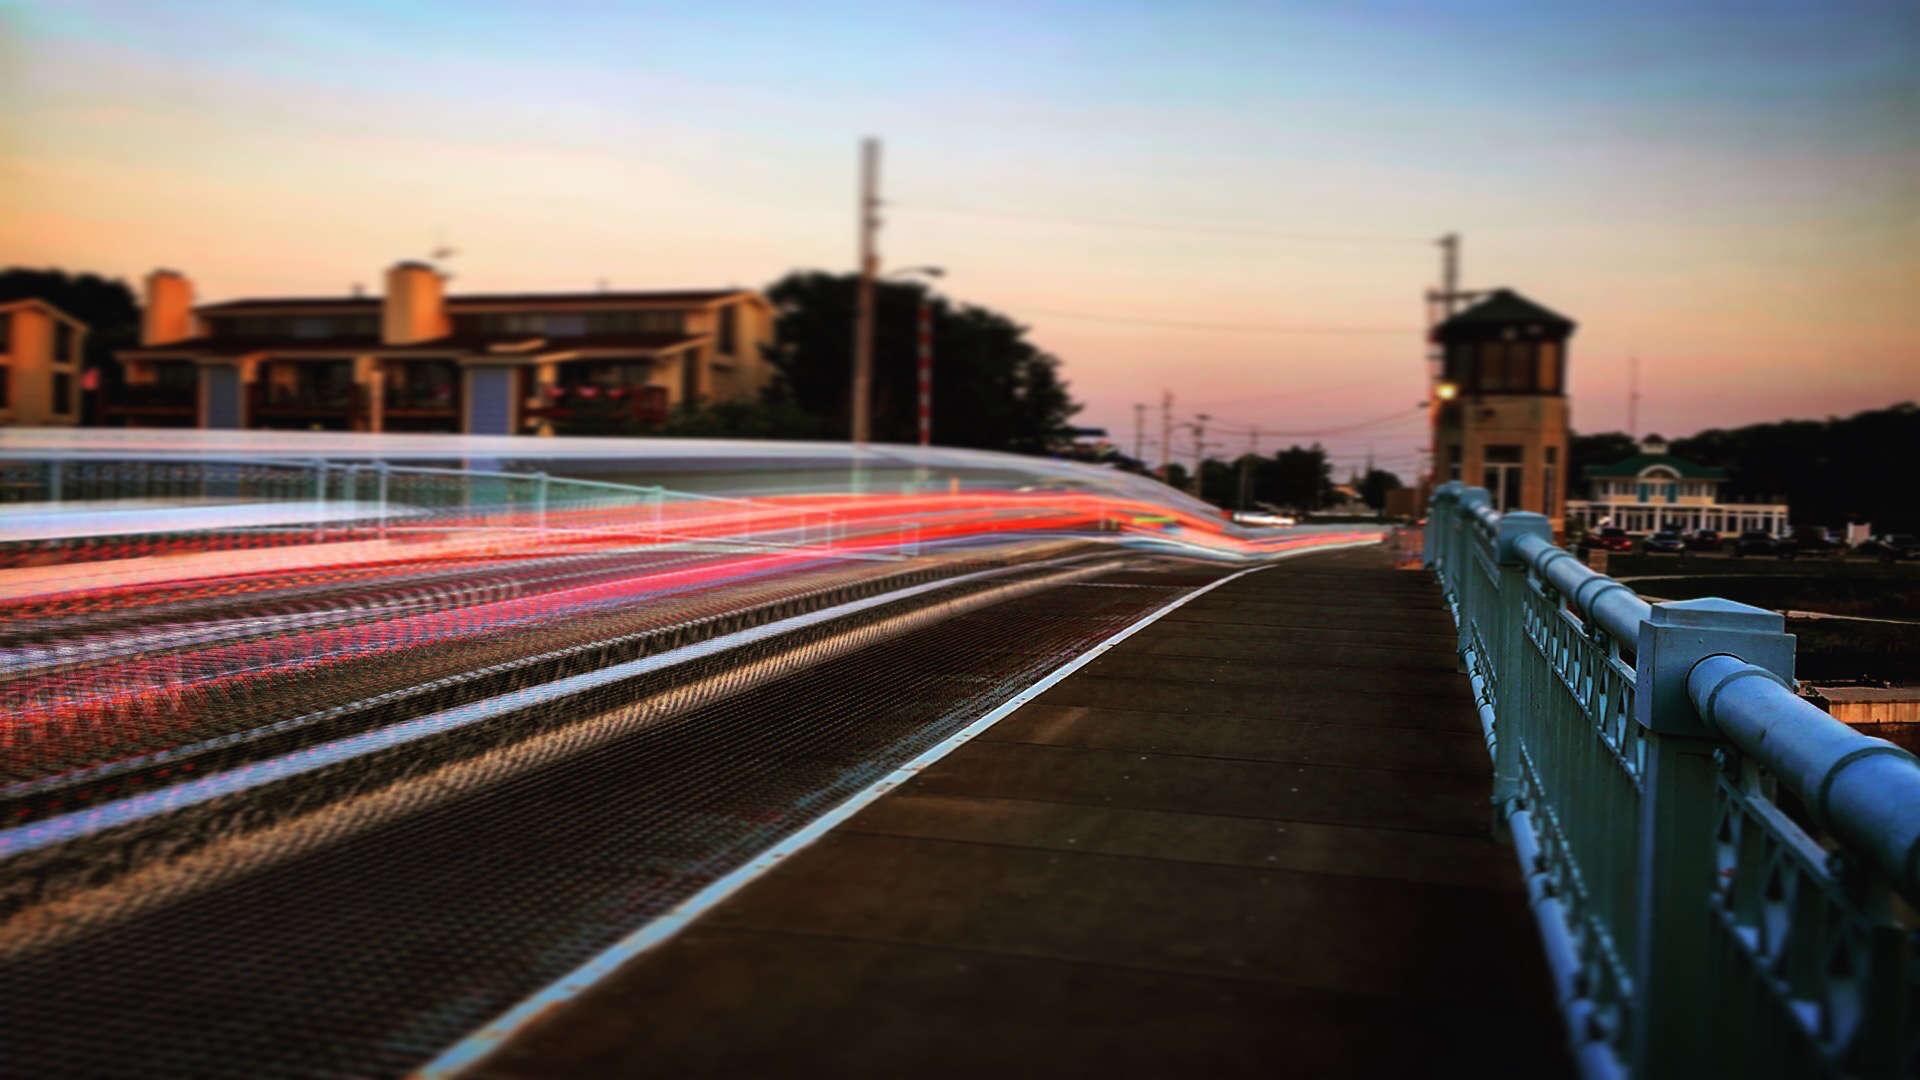 How to capture long exposures and light trails with your